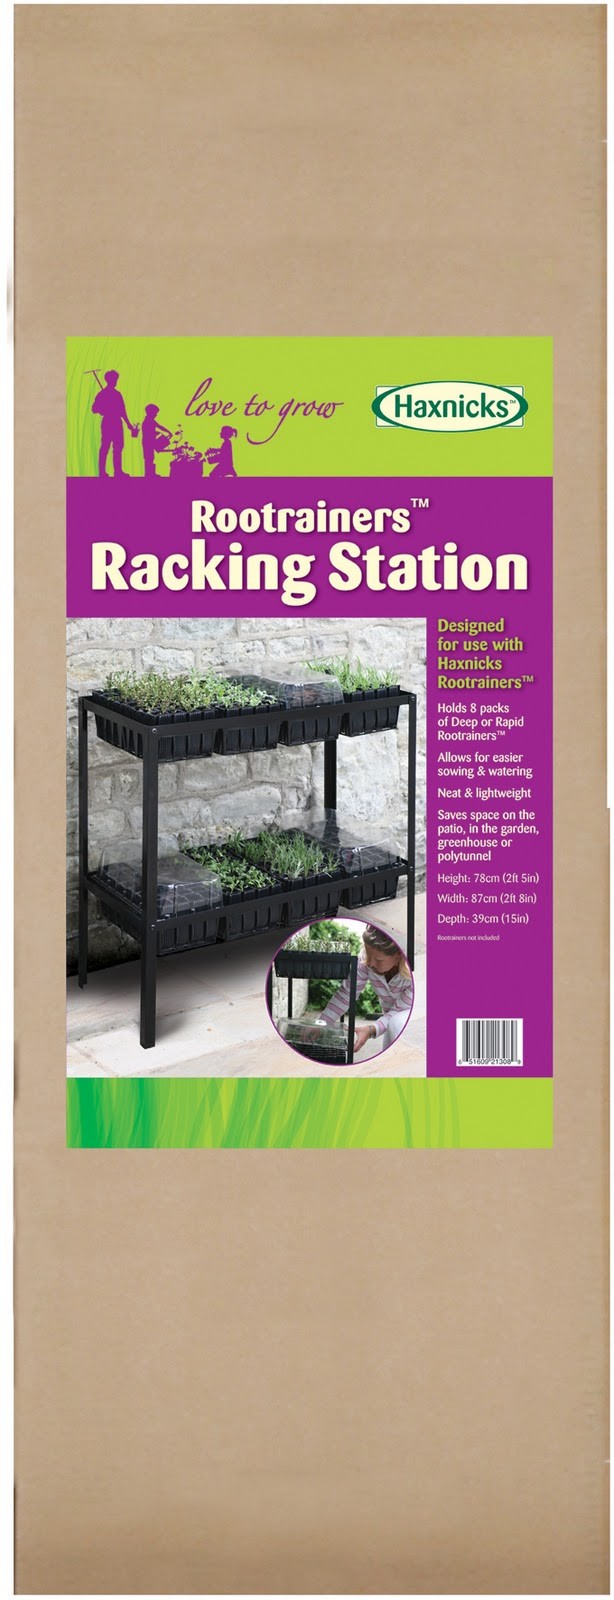 Haxnicks Rootrainers Racking Station